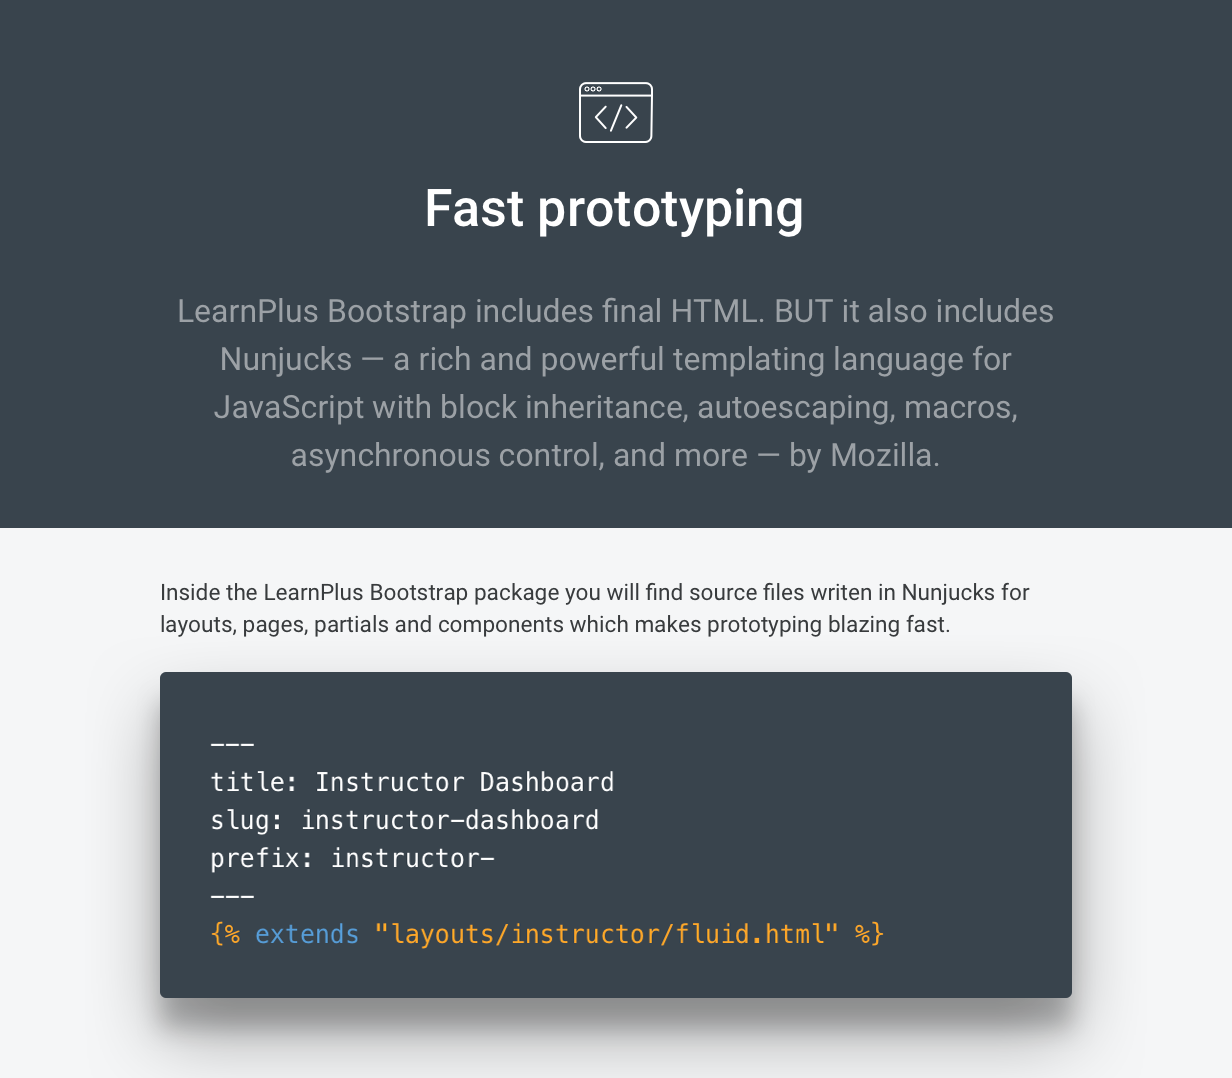 LearnPlus Bootstrap - LMS Dashboard Template - provides fast prototyping tools